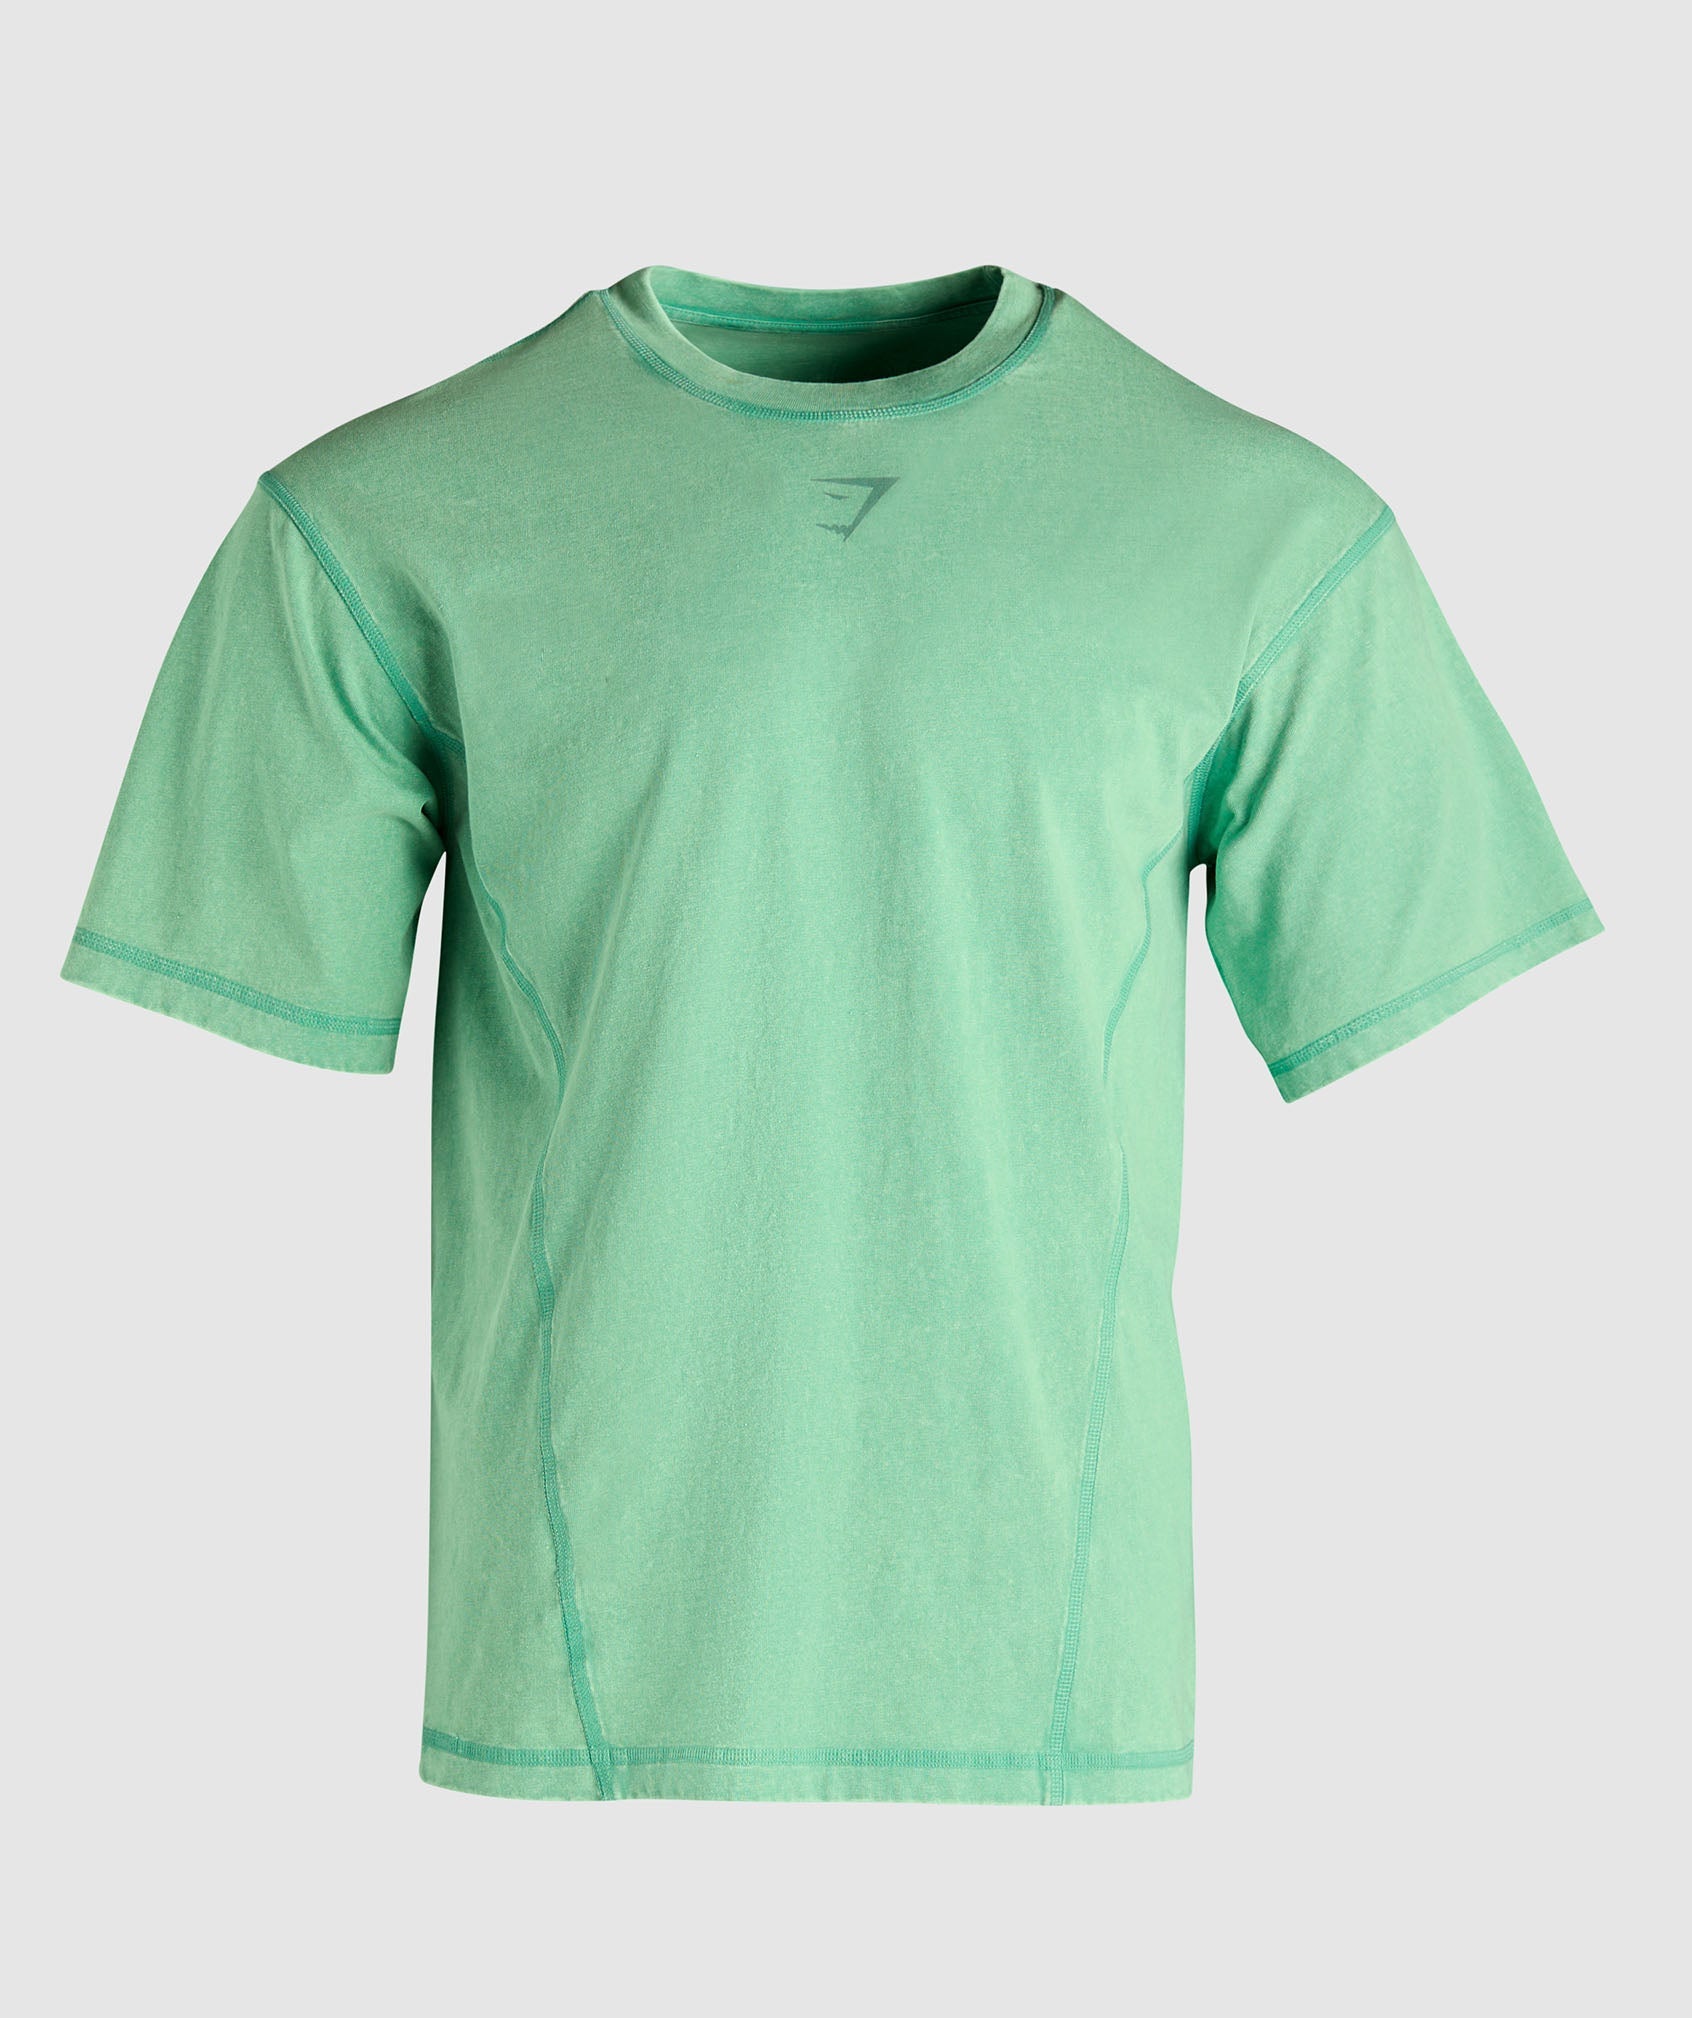 Heritage Washed T-Shirt in Lagoon Green - view 7